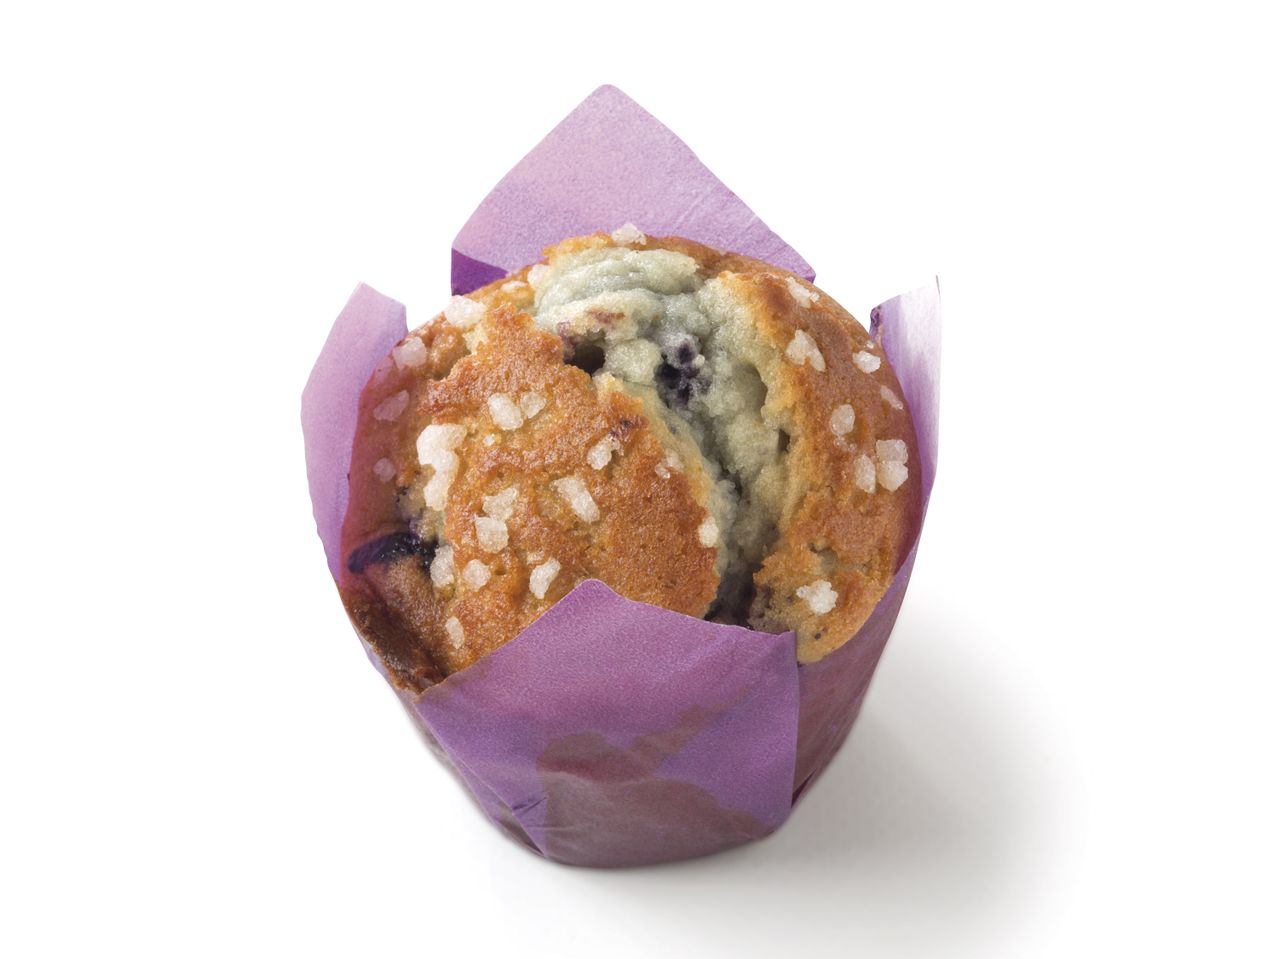 Go to full screen view: Filled Muffins - Image 2